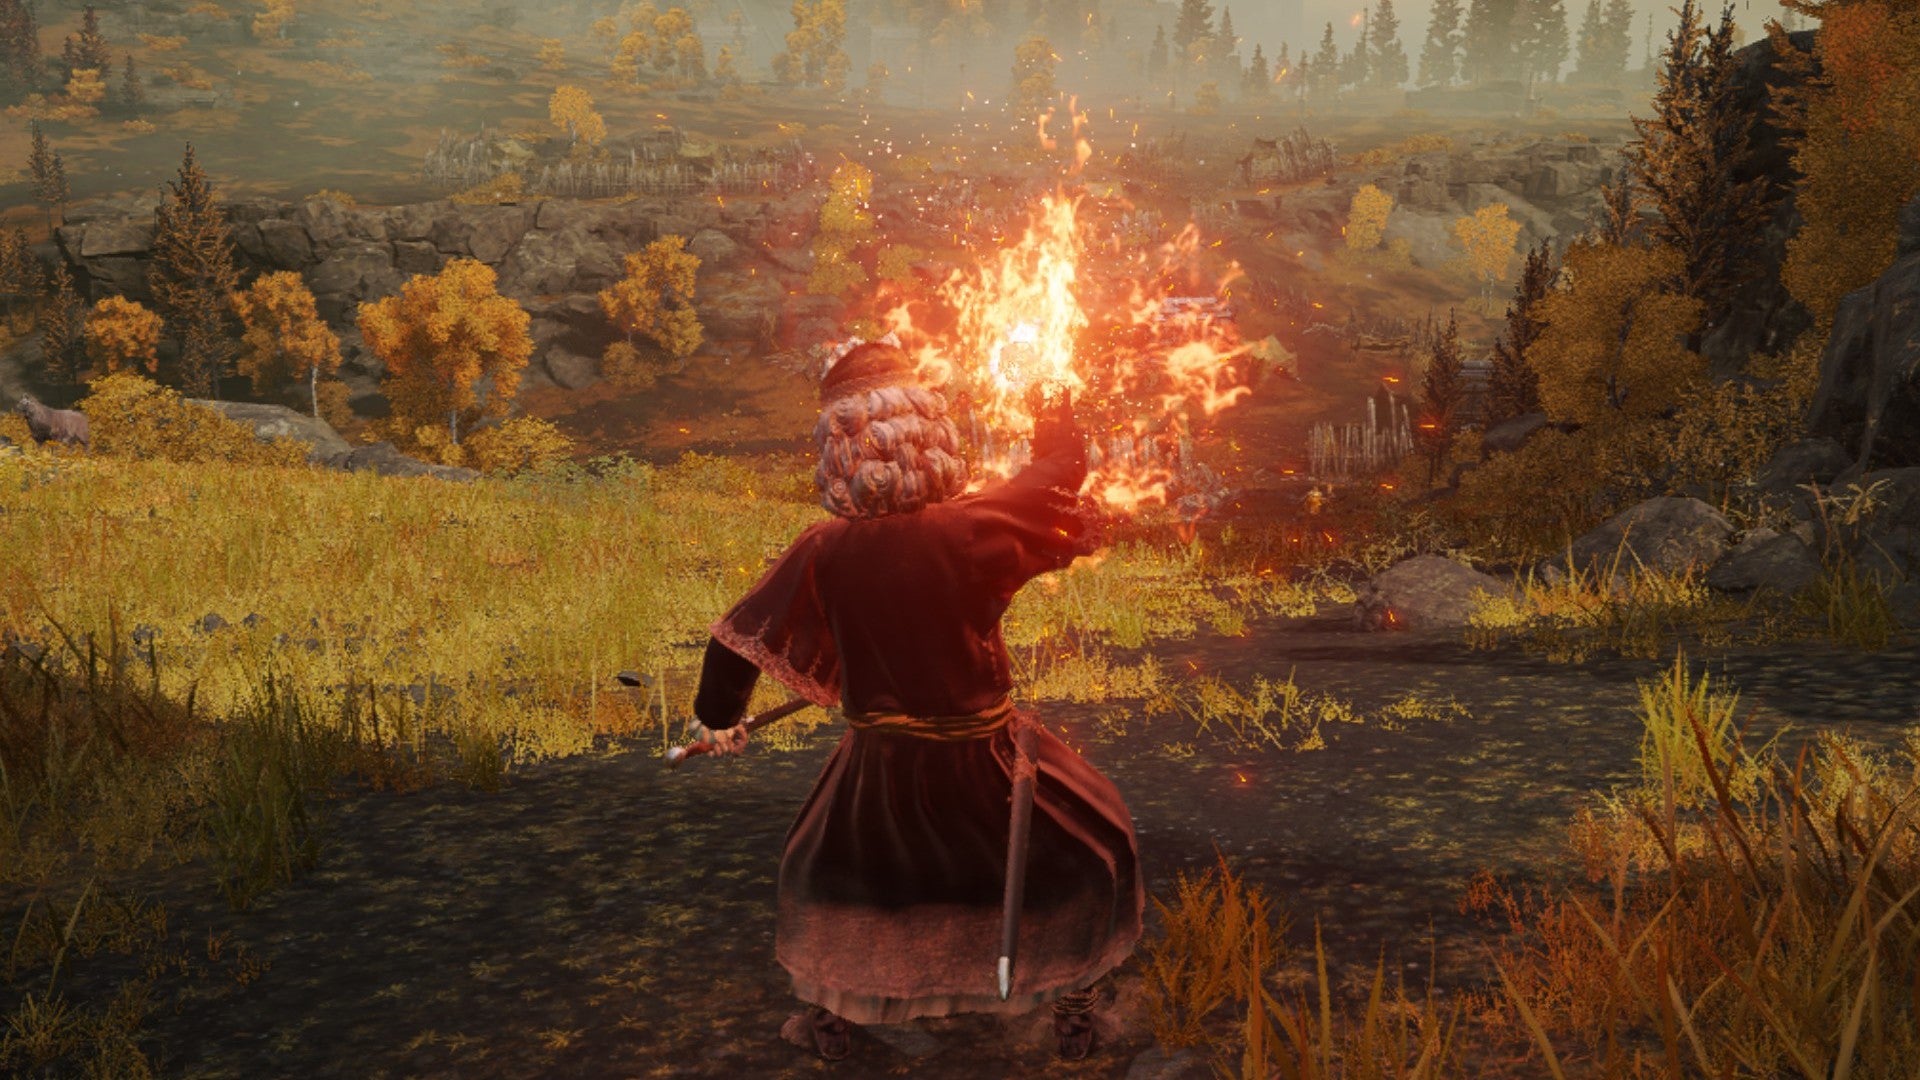 Elden ring player casting Flame Sling on a hill basked in sun